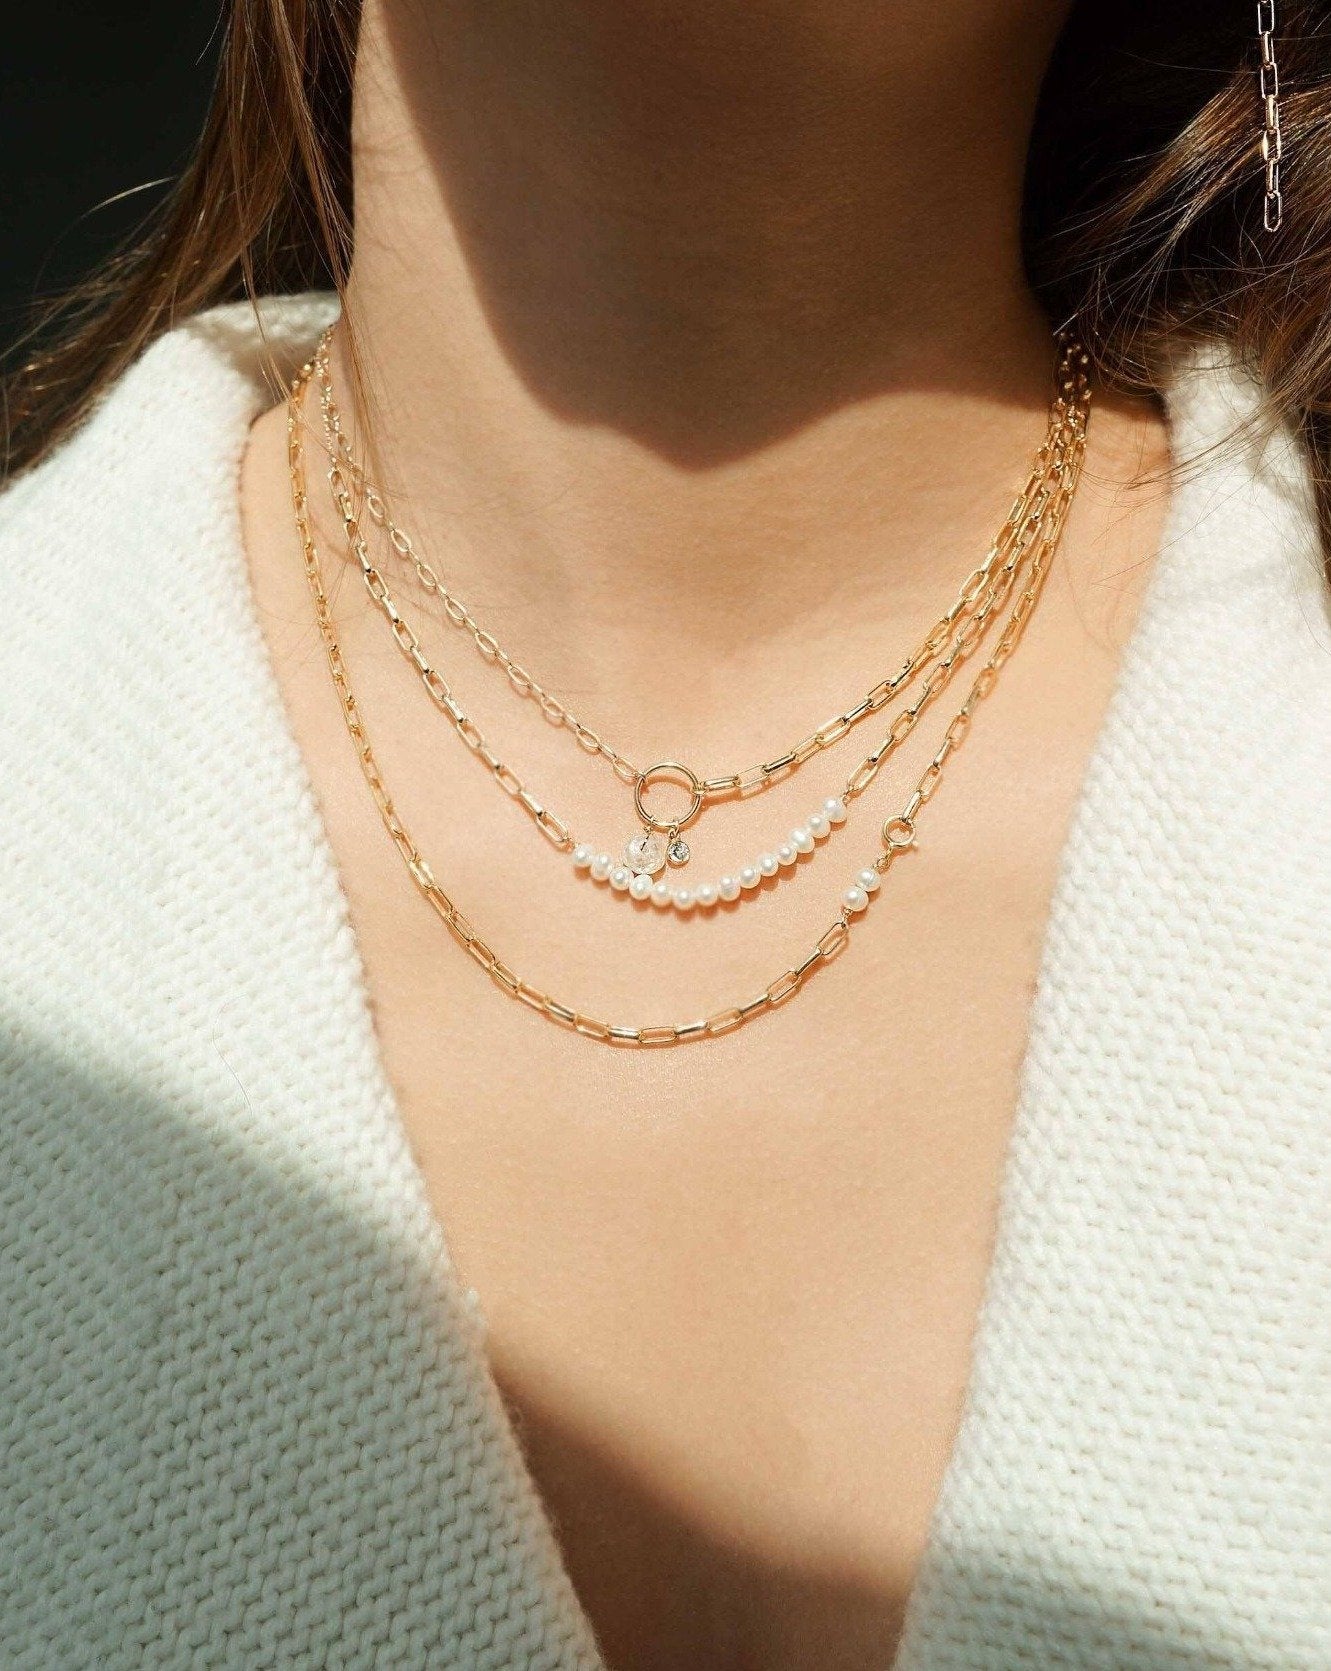 Farida Necklace by KOZAKH. A 16 to 18 inch adjustable length necklace in 14K Gold Filled, featuring 5mm white Freshwater Pearls. 